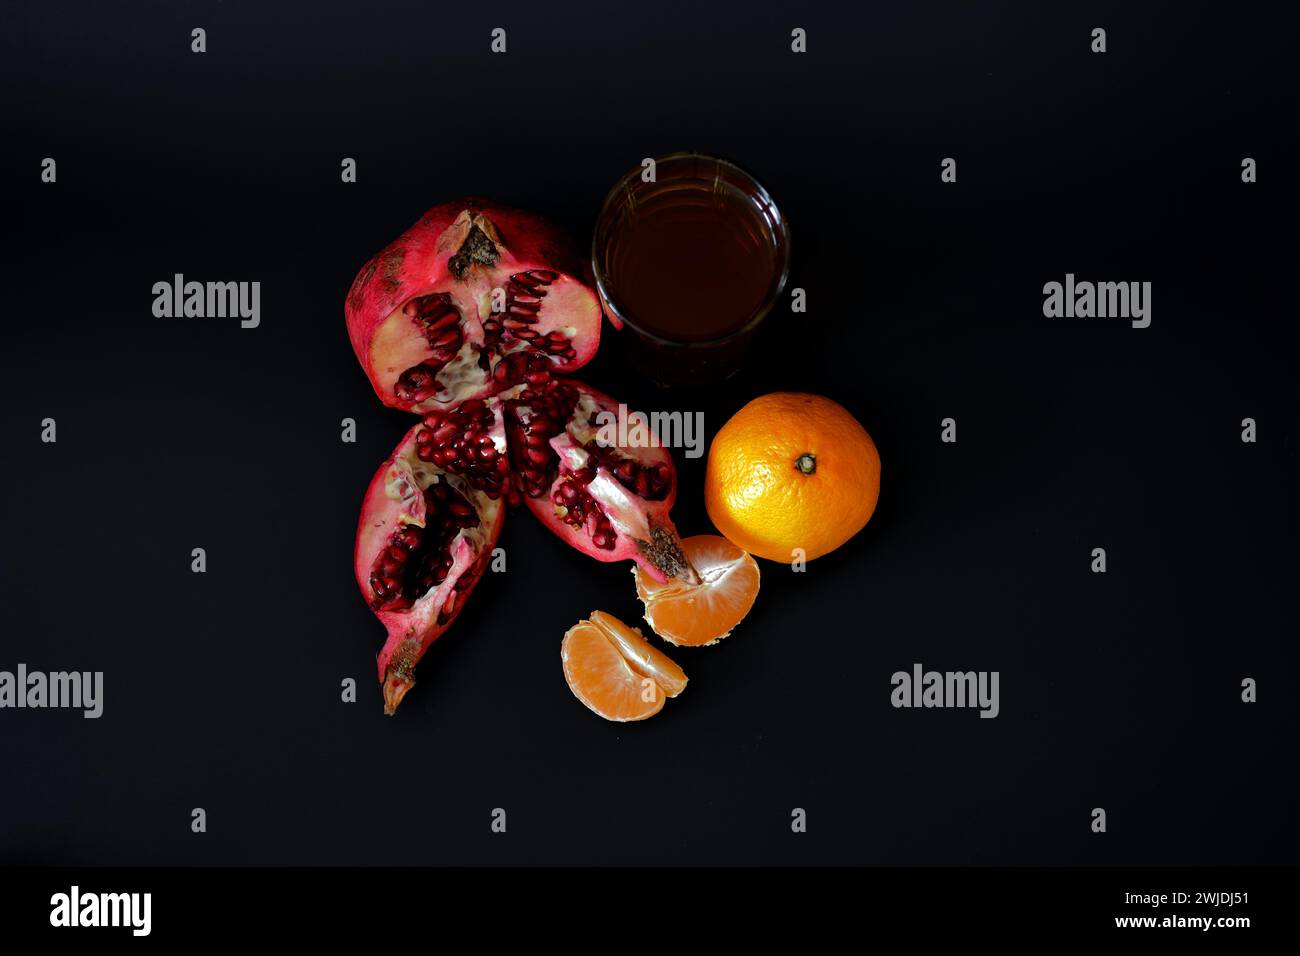 A tall glass of a mixture of fruit juices on a black background, a ripe tangerine and a broken pomegranate fruit with seeds. Close-up. Stock Photo